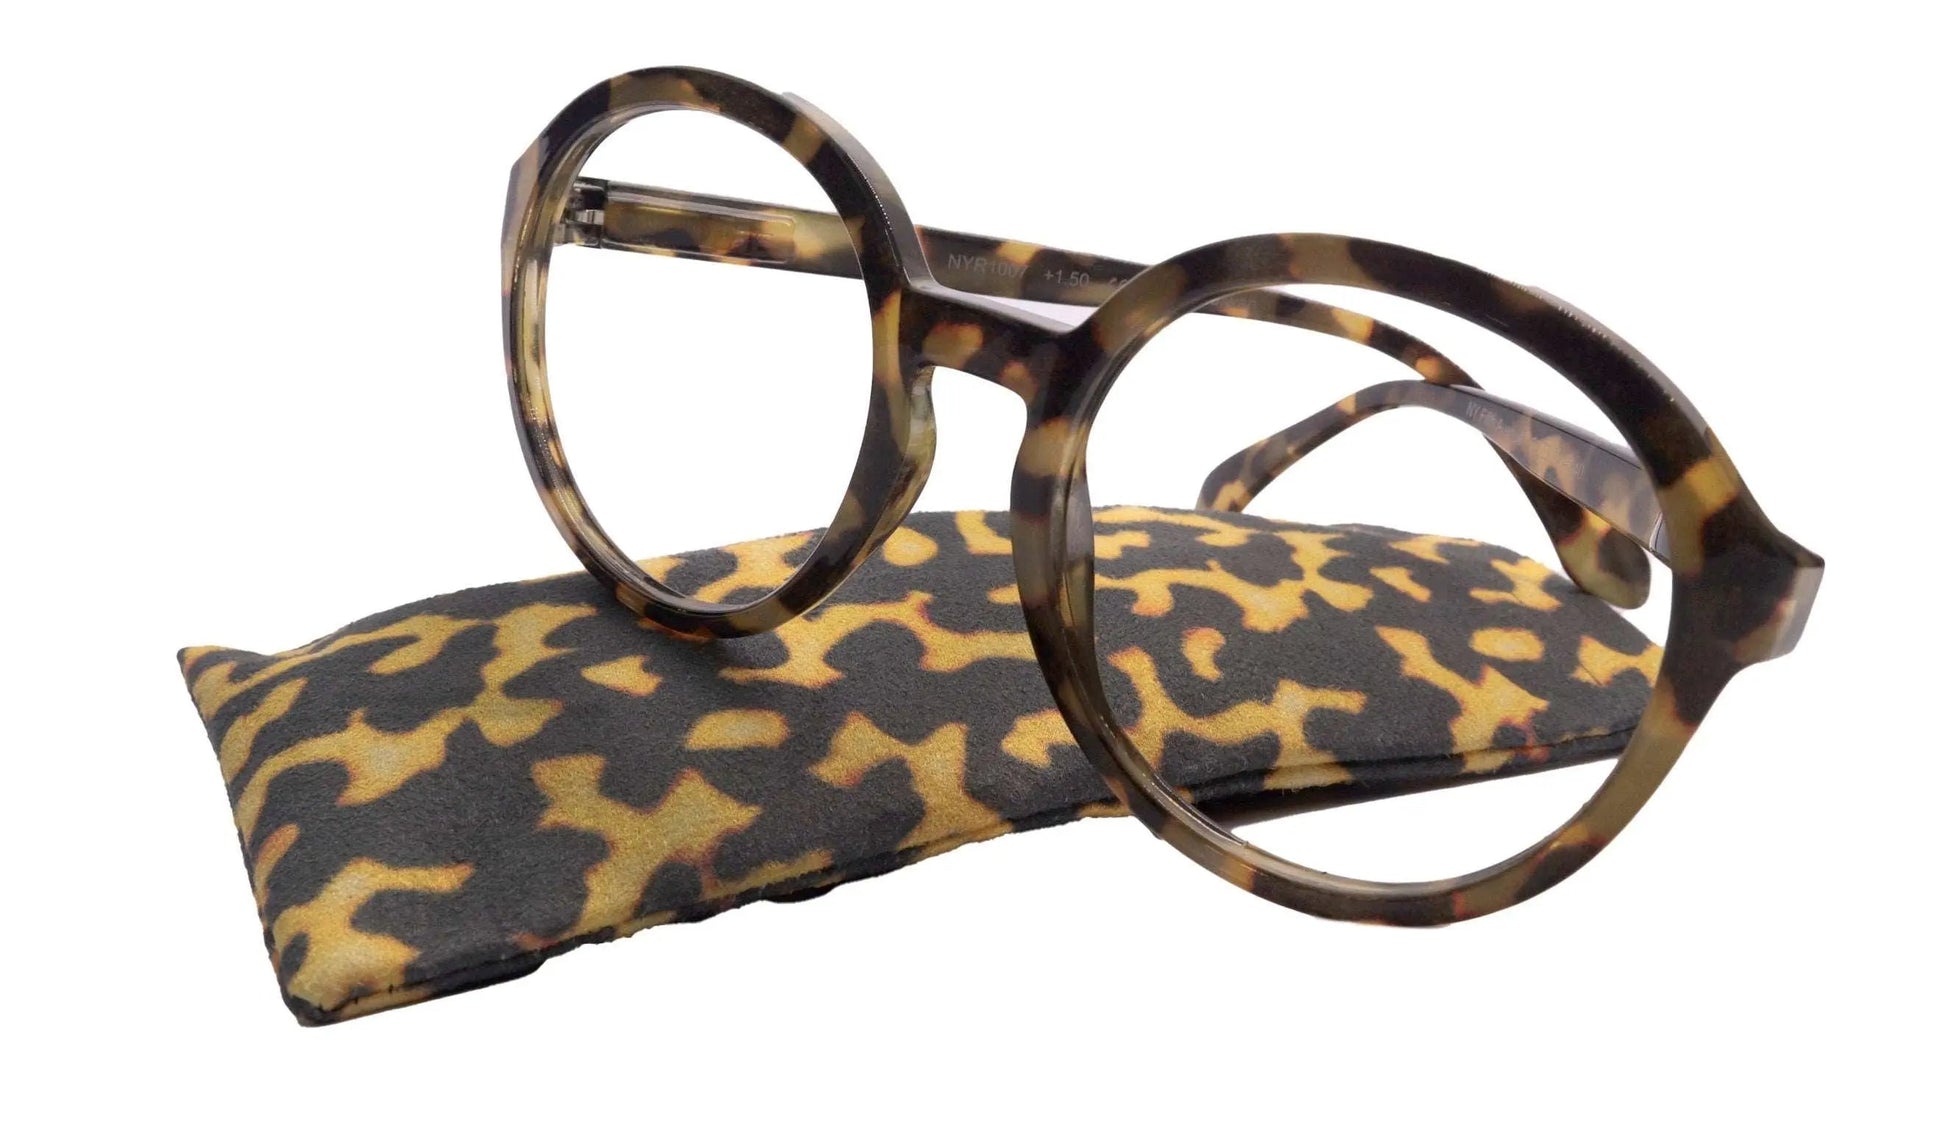 Jackie O, (Premium) Women Reading Glasses, High End Readers (Leopard) (Oversize Large Round) Magnifying Eyeglasses, Optical, NY Fifth Avenue 